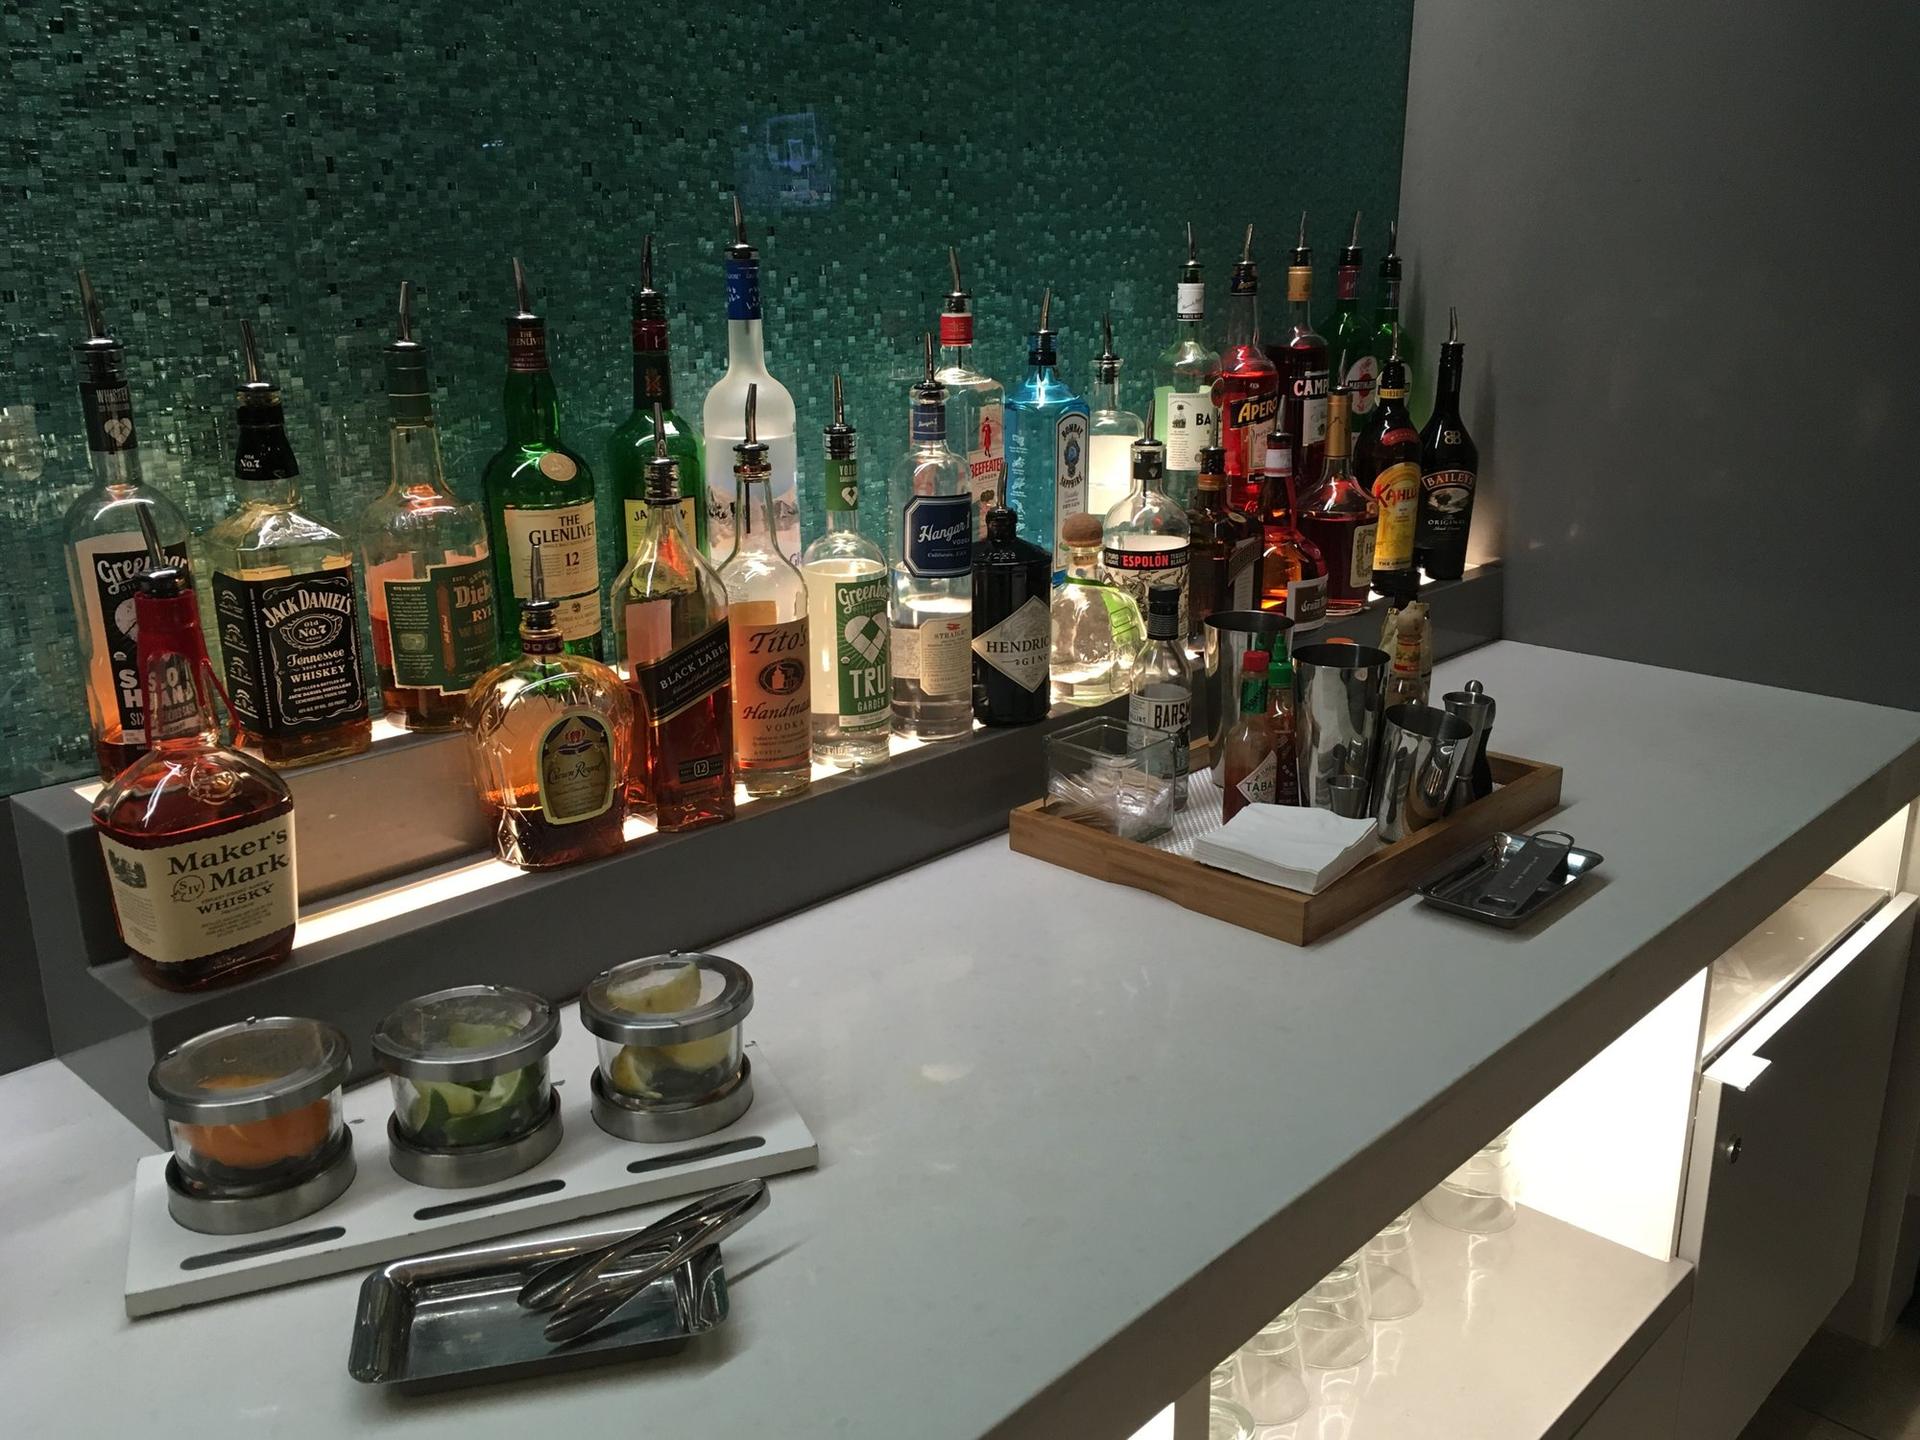 American Airlines Flagship Lounge image 34 of 65